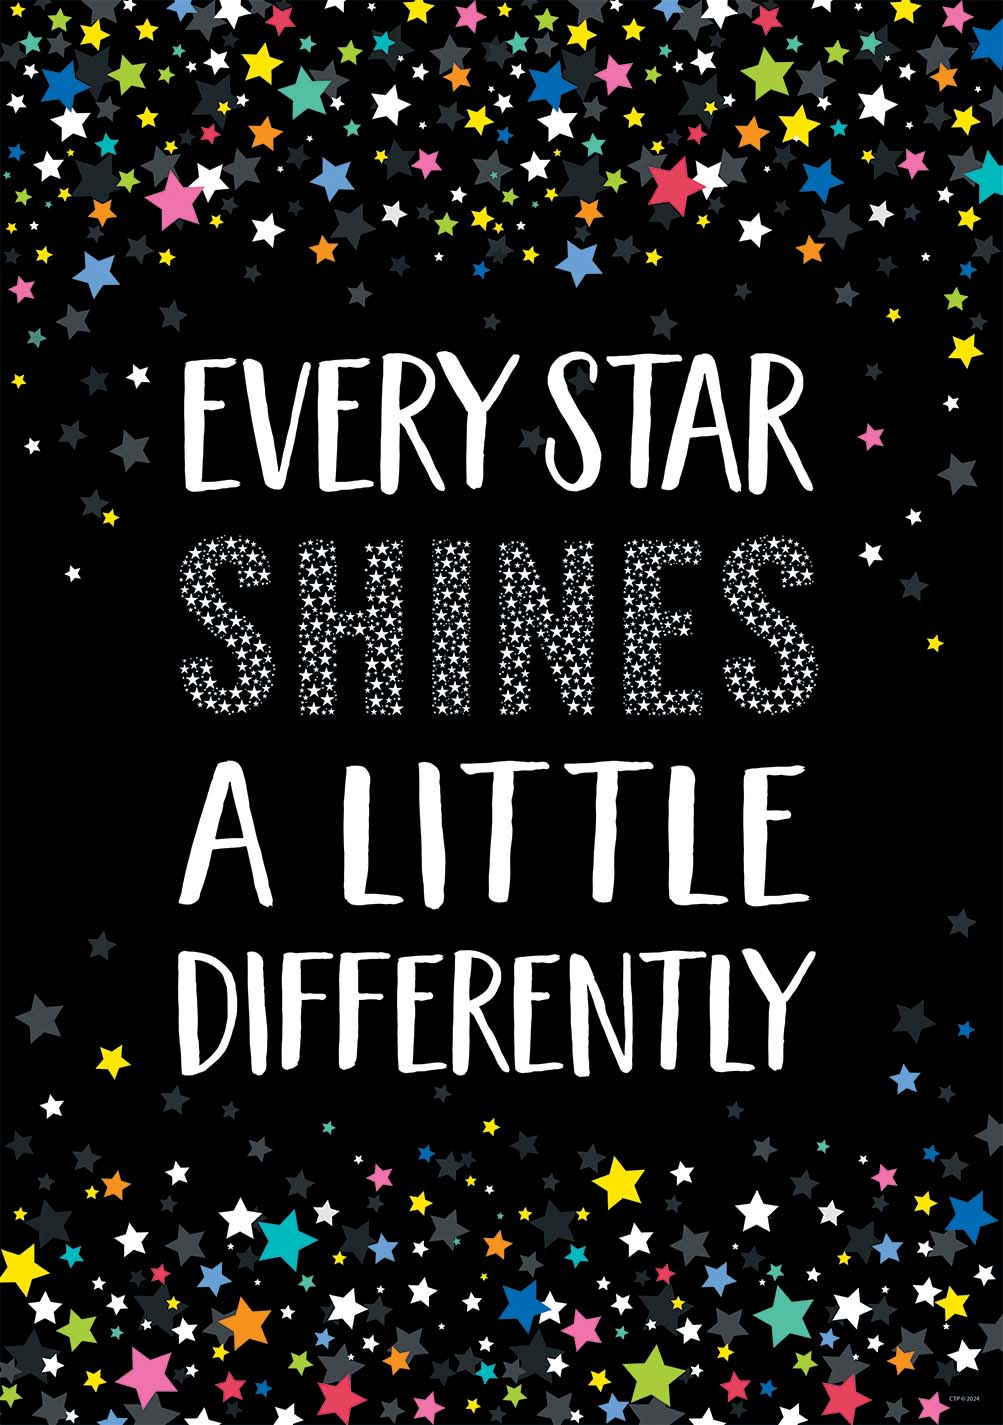 CTP Star Bright Every Star Shines a Little Differently Inspire U Poster (CTP 10958)